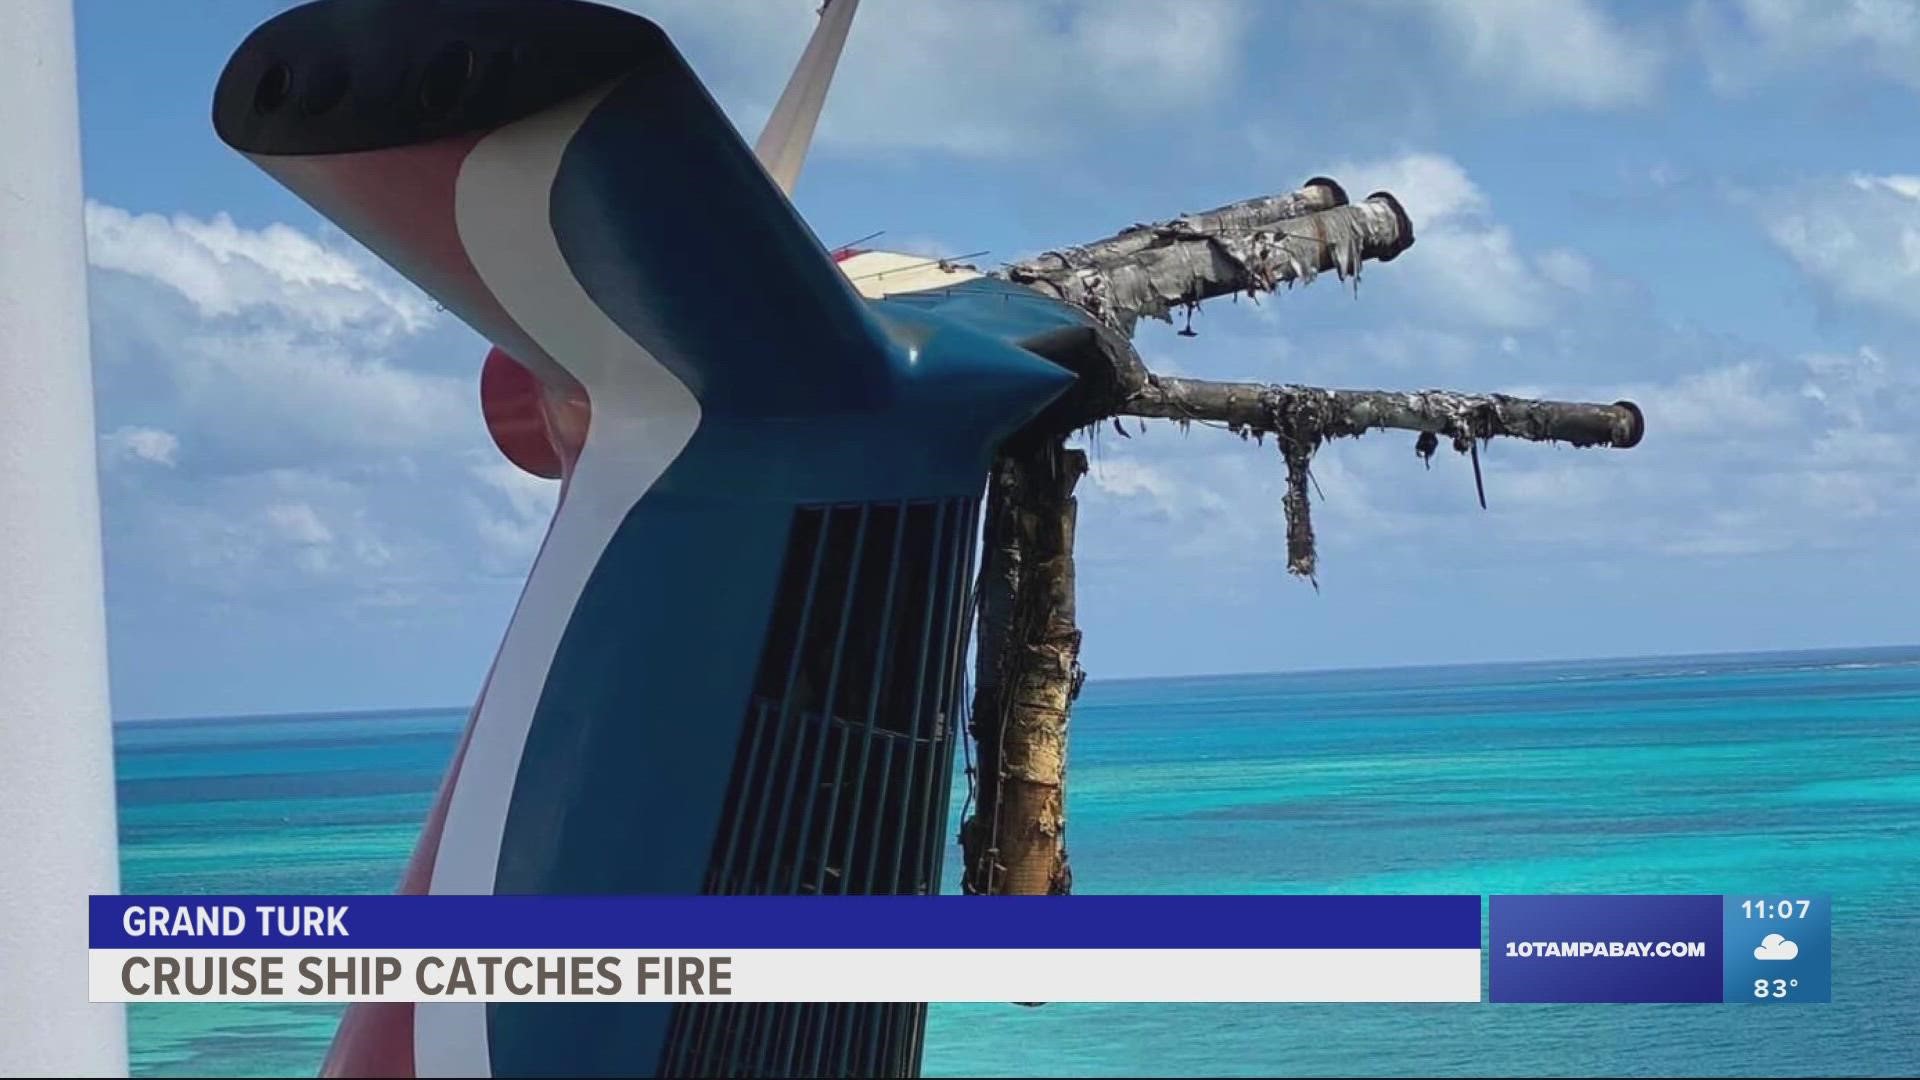 The Carnival Cruise Line says the fire started in the ship's funnel.